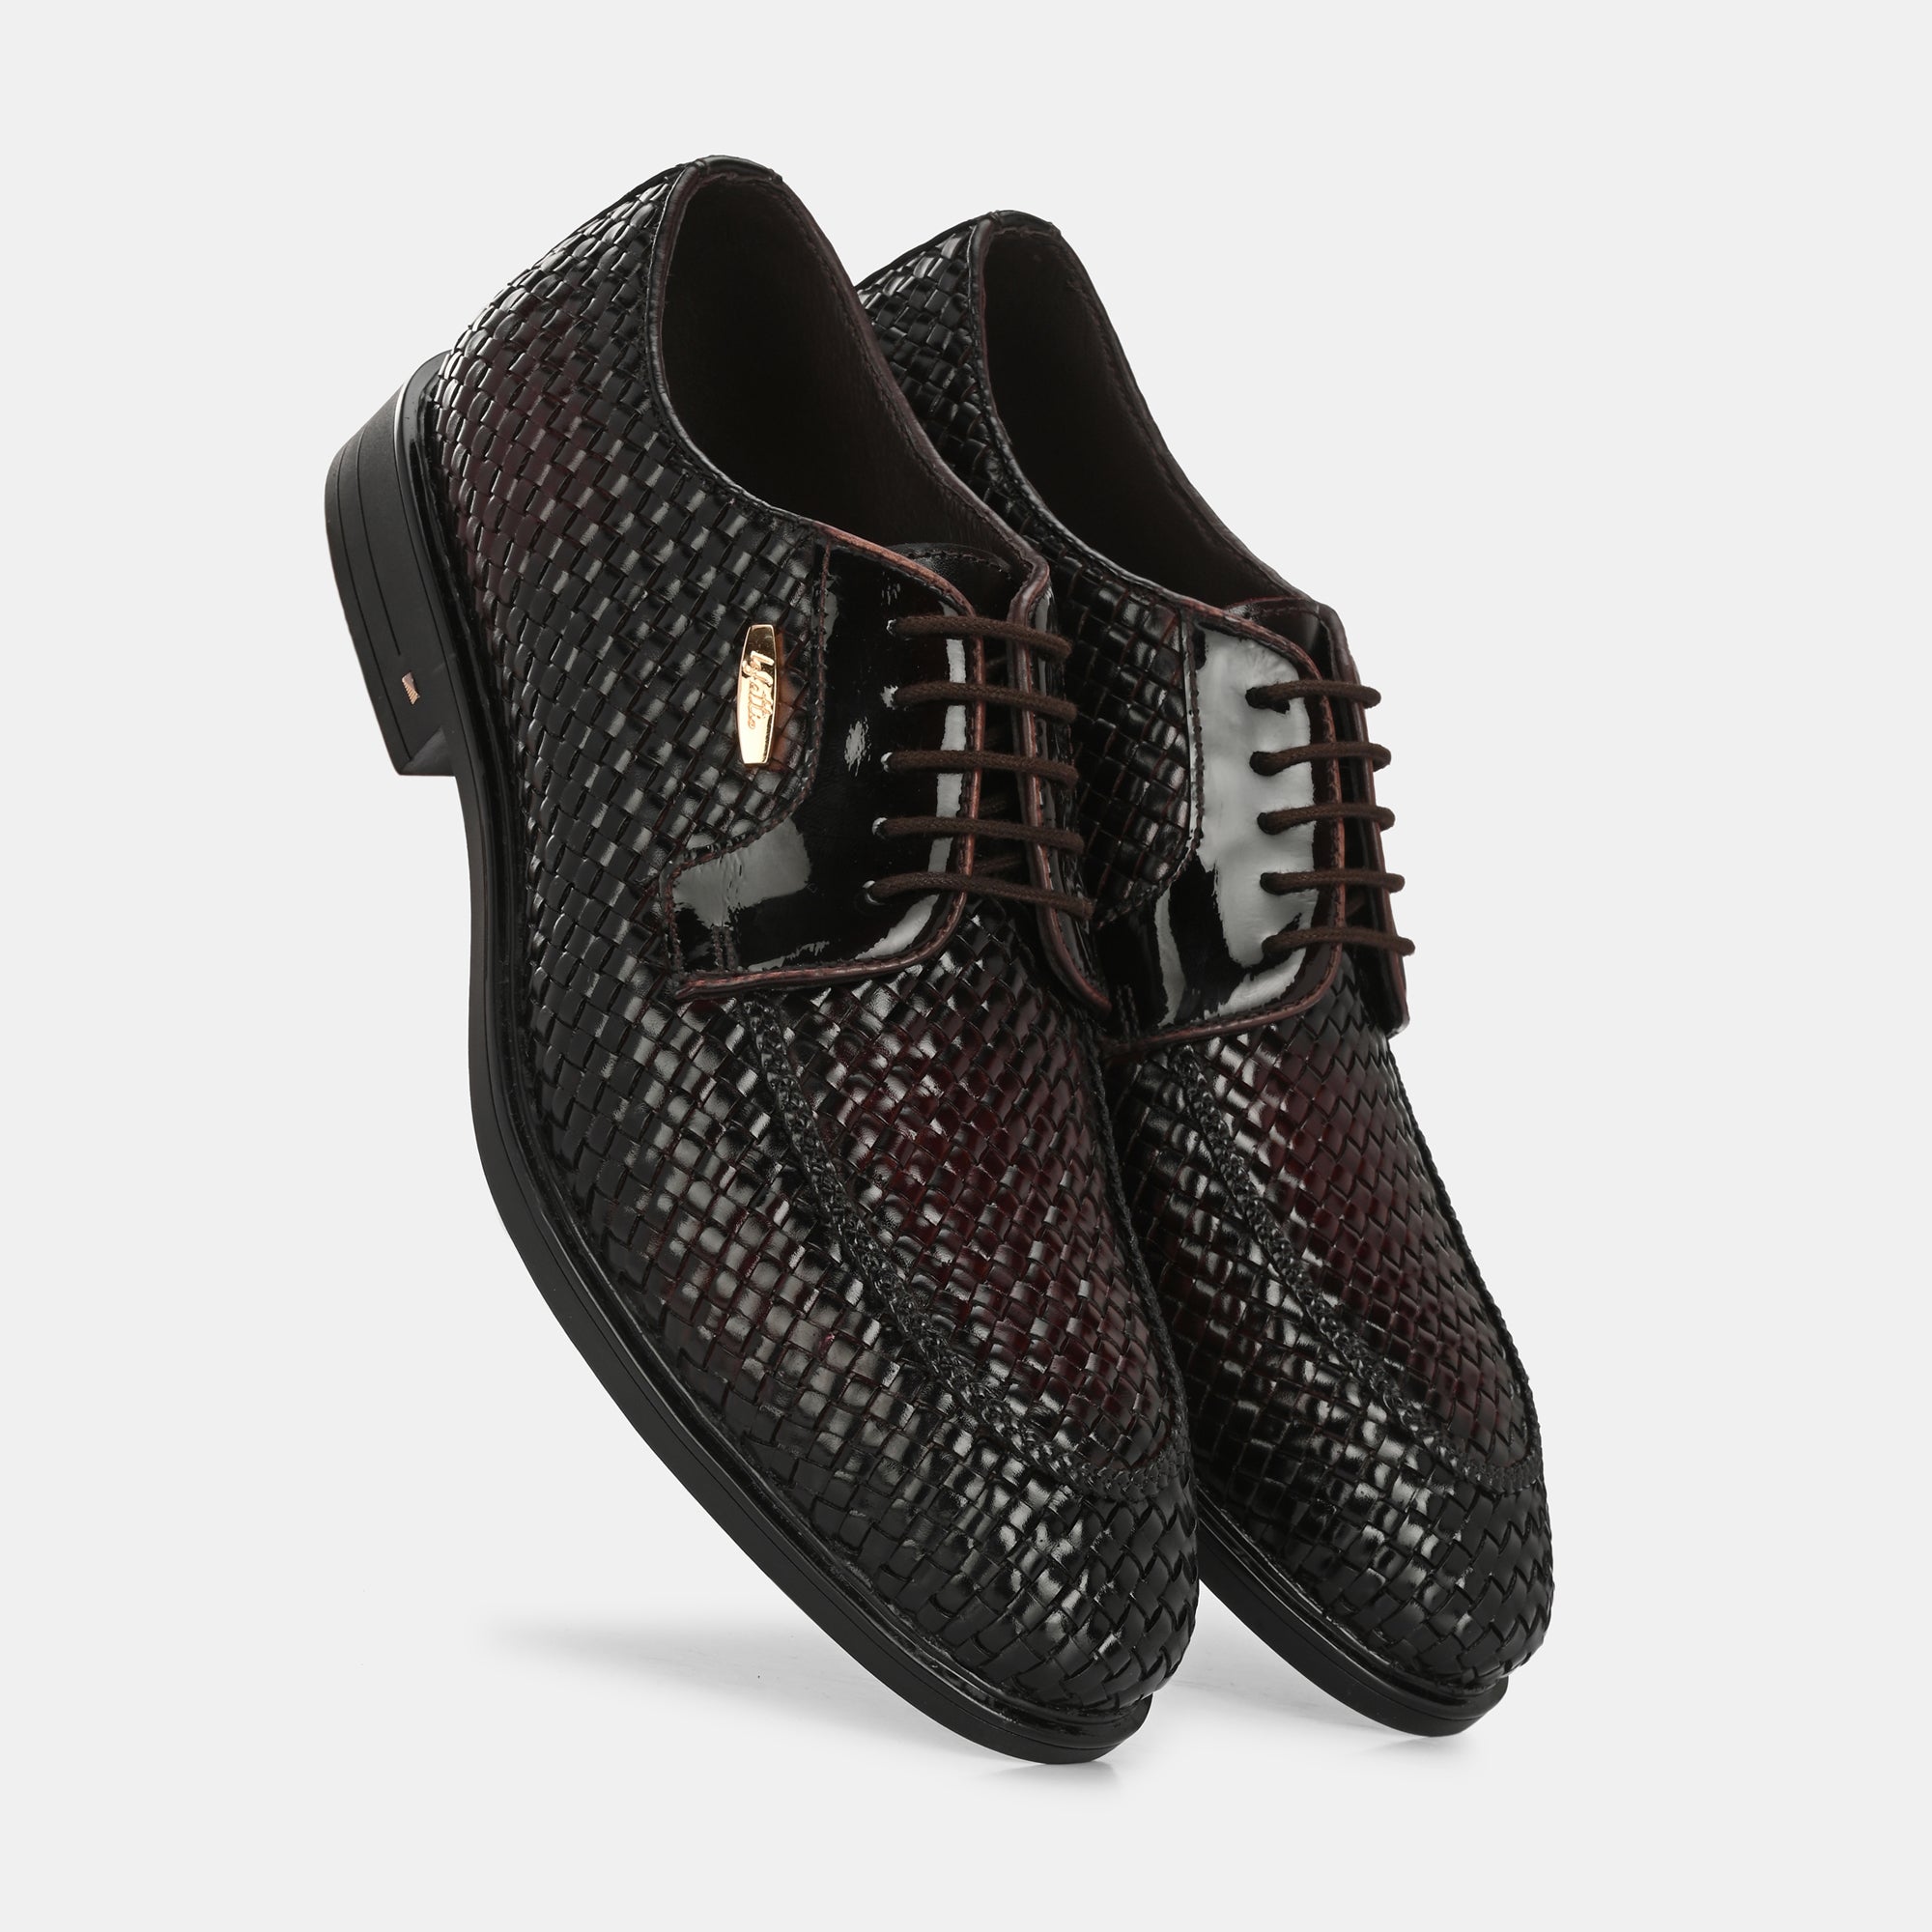 Hand-Woven Lace-Up Shoes by Lafattio